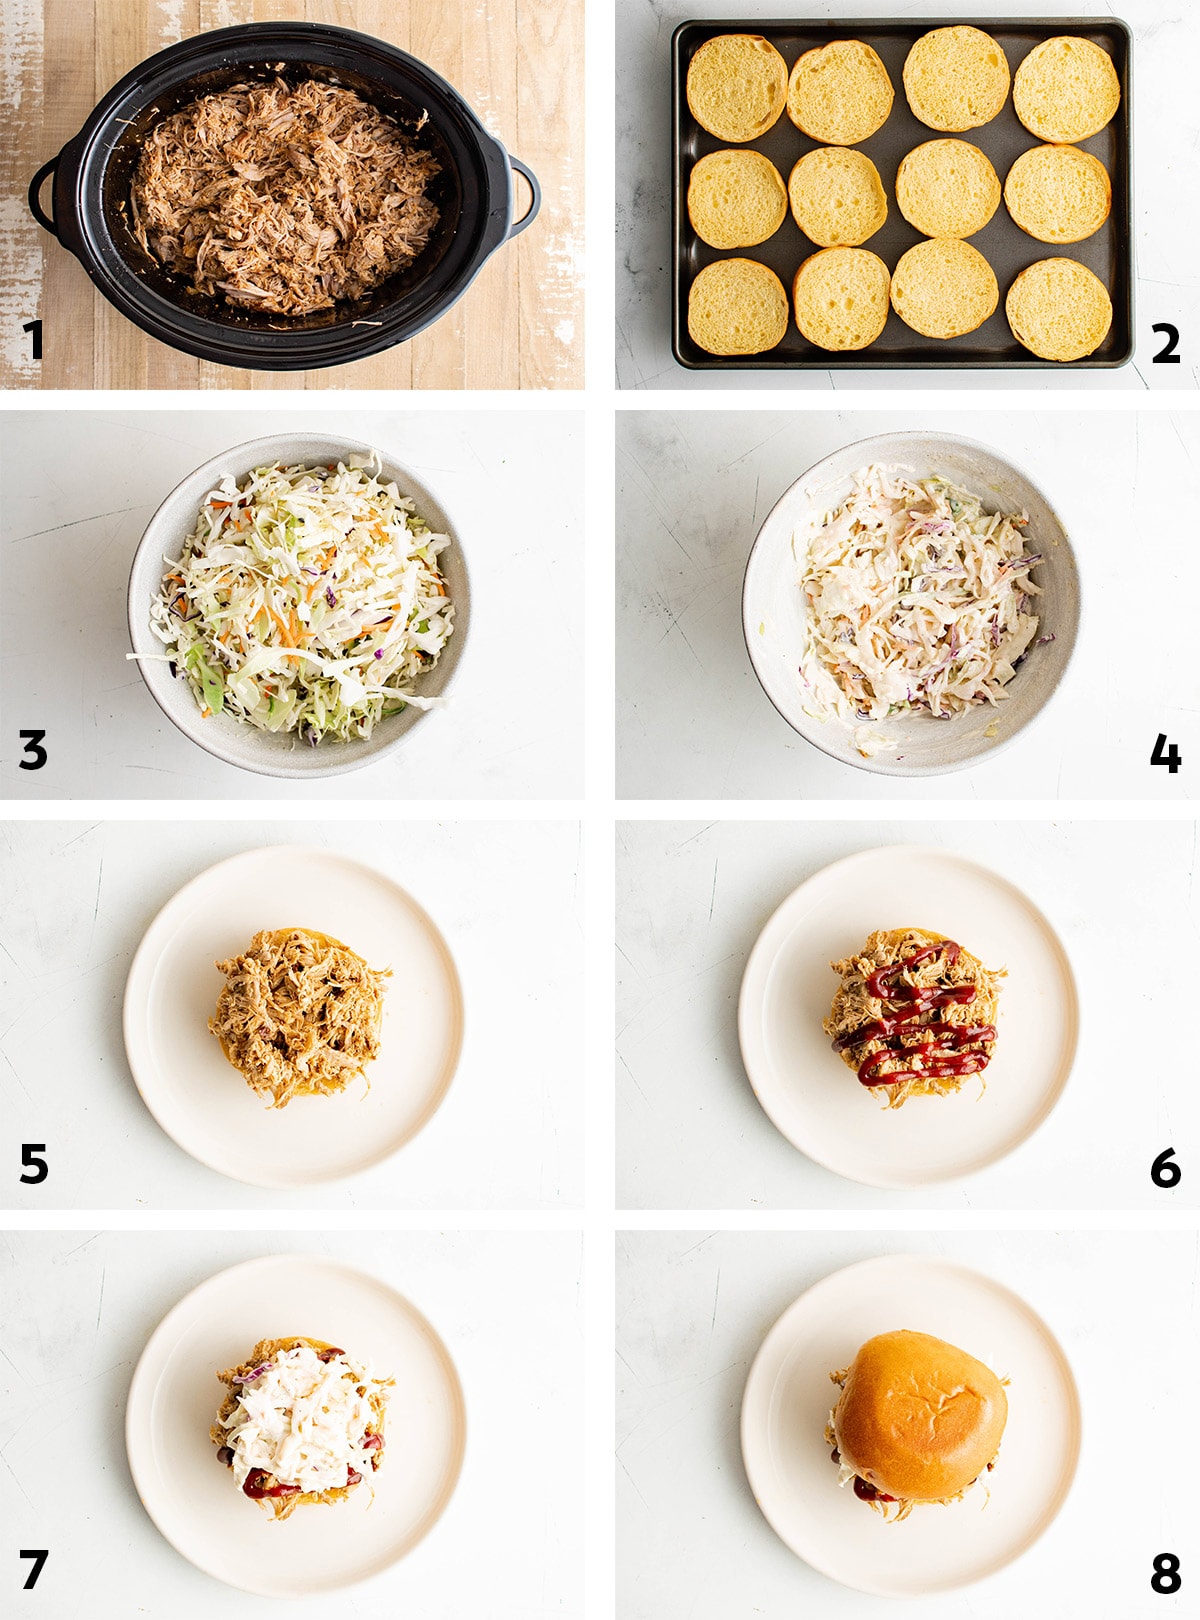 Collage of images showing the steps for making pulled pork sandwiches.